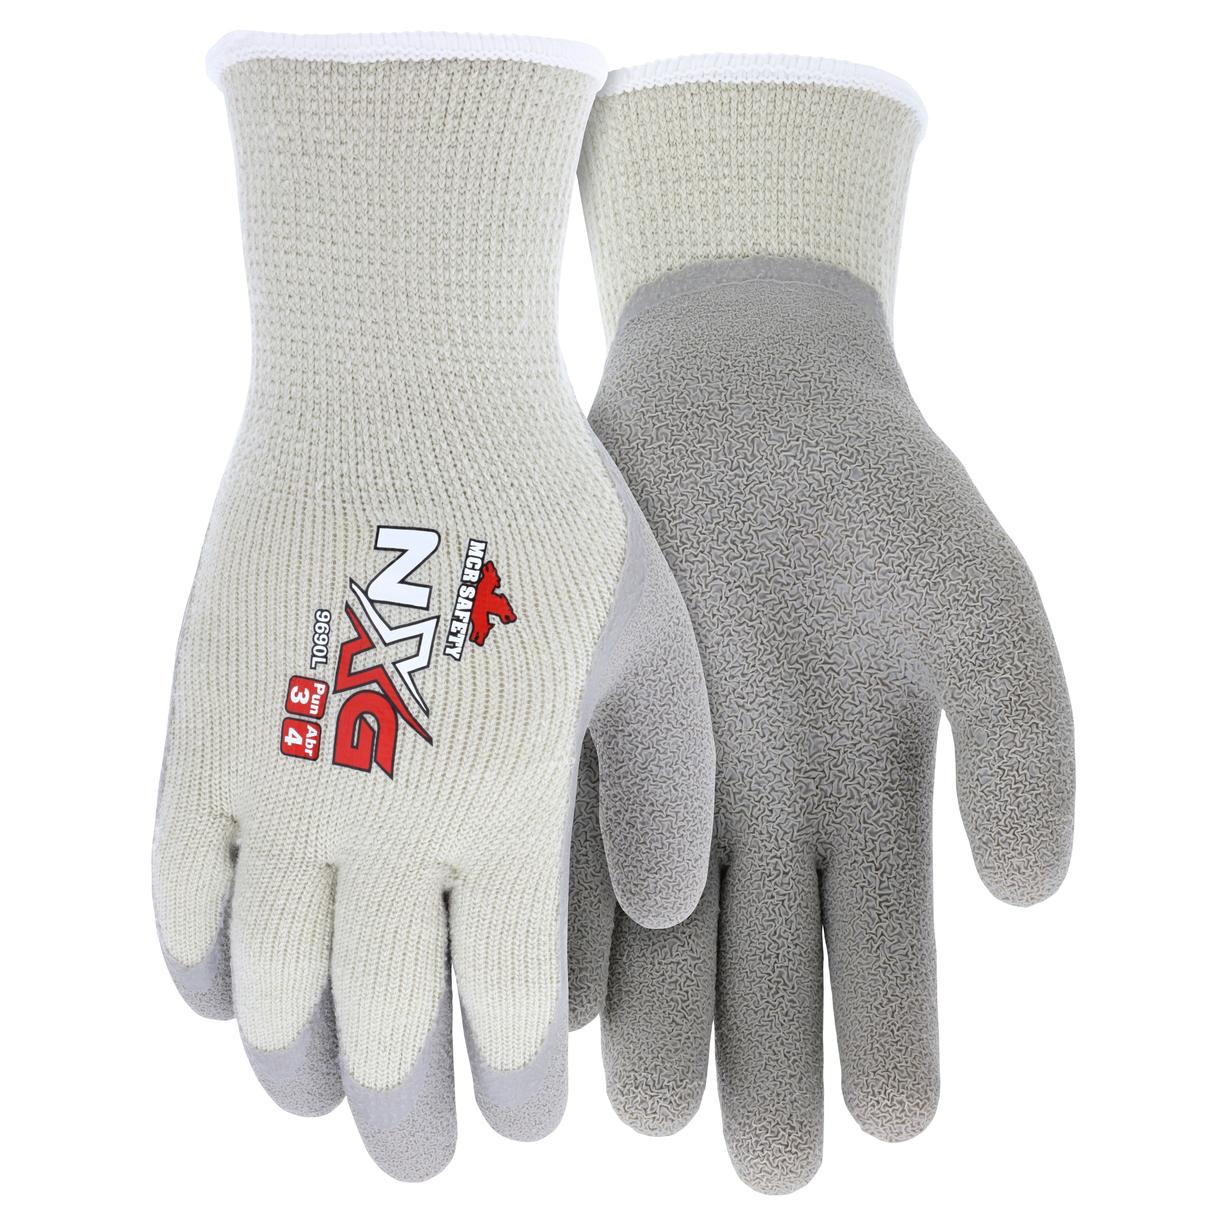 Flex Therm® String Knit Winter Safety Work Gloves S,M,L,XL FREE SHIPPING 